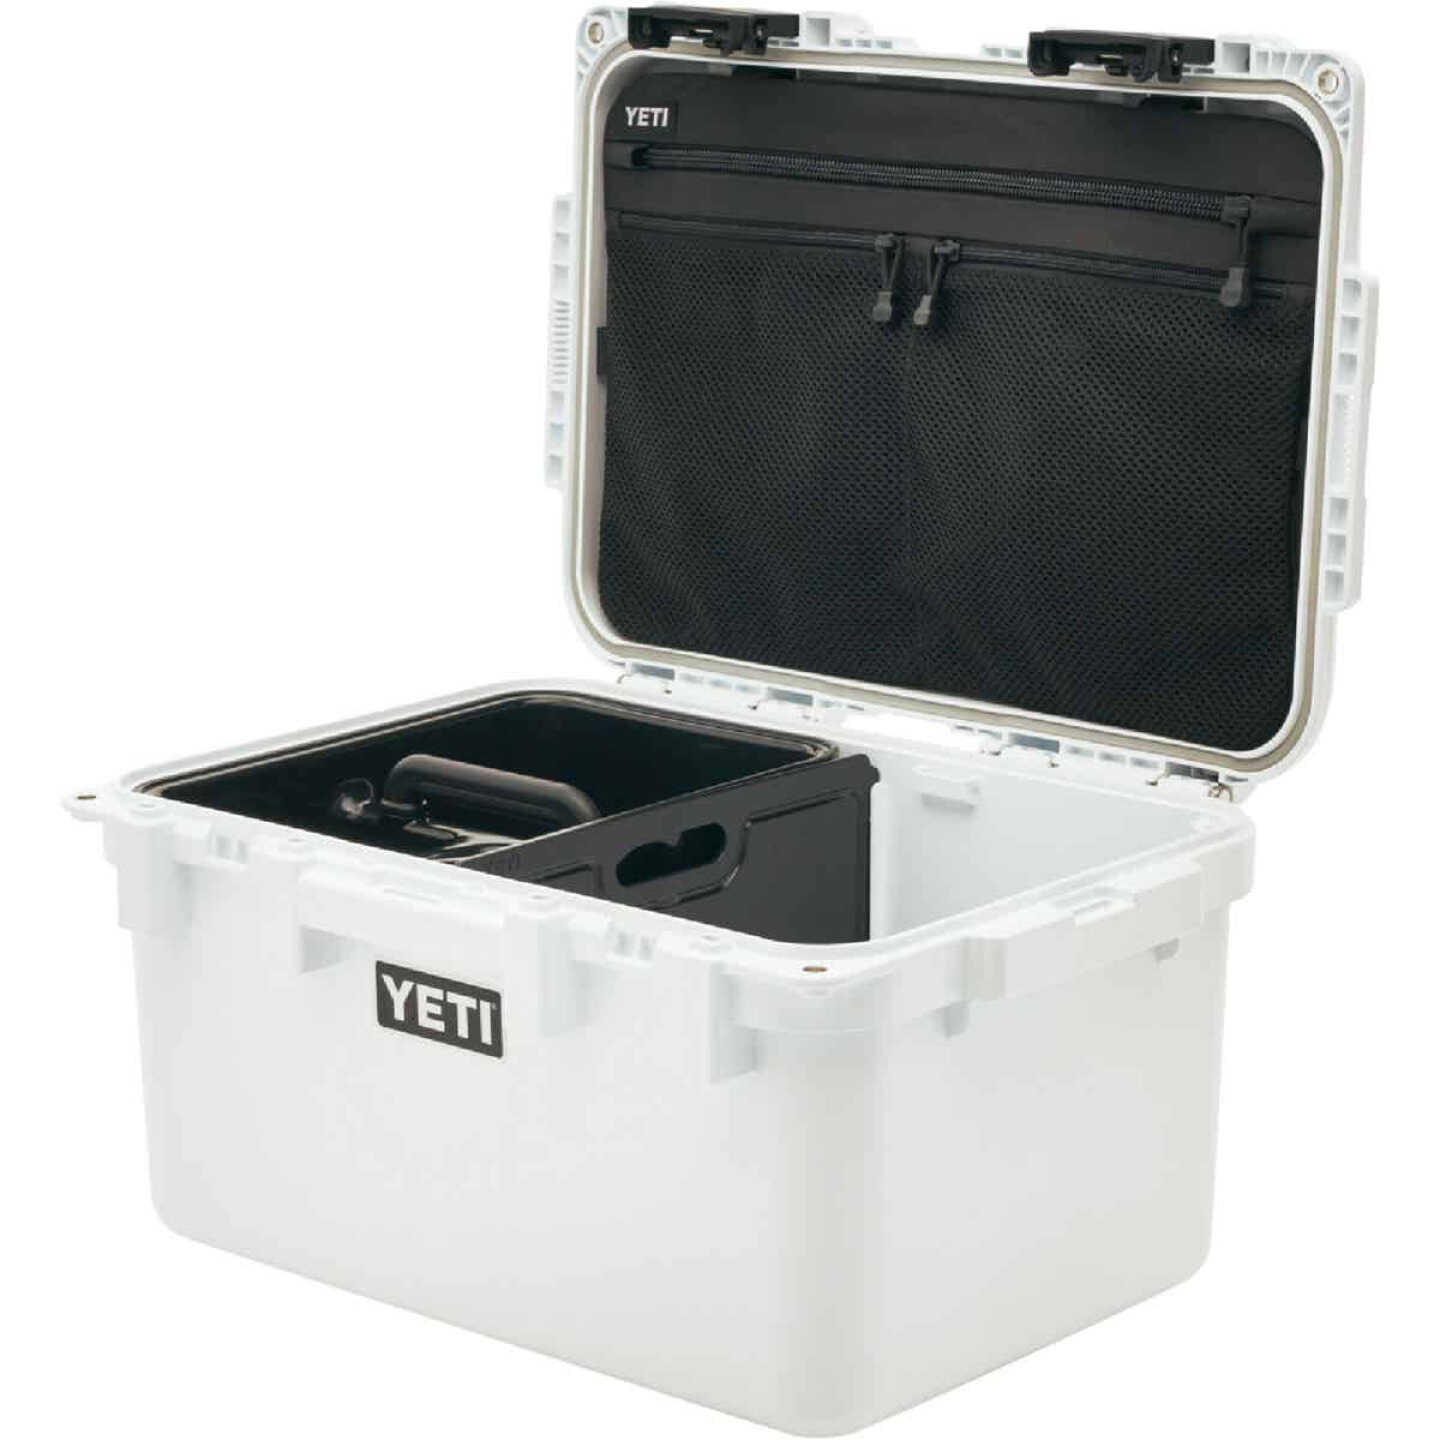 YETI LoadOut GoBox 30: The Brand's All-New Indestructible Storage